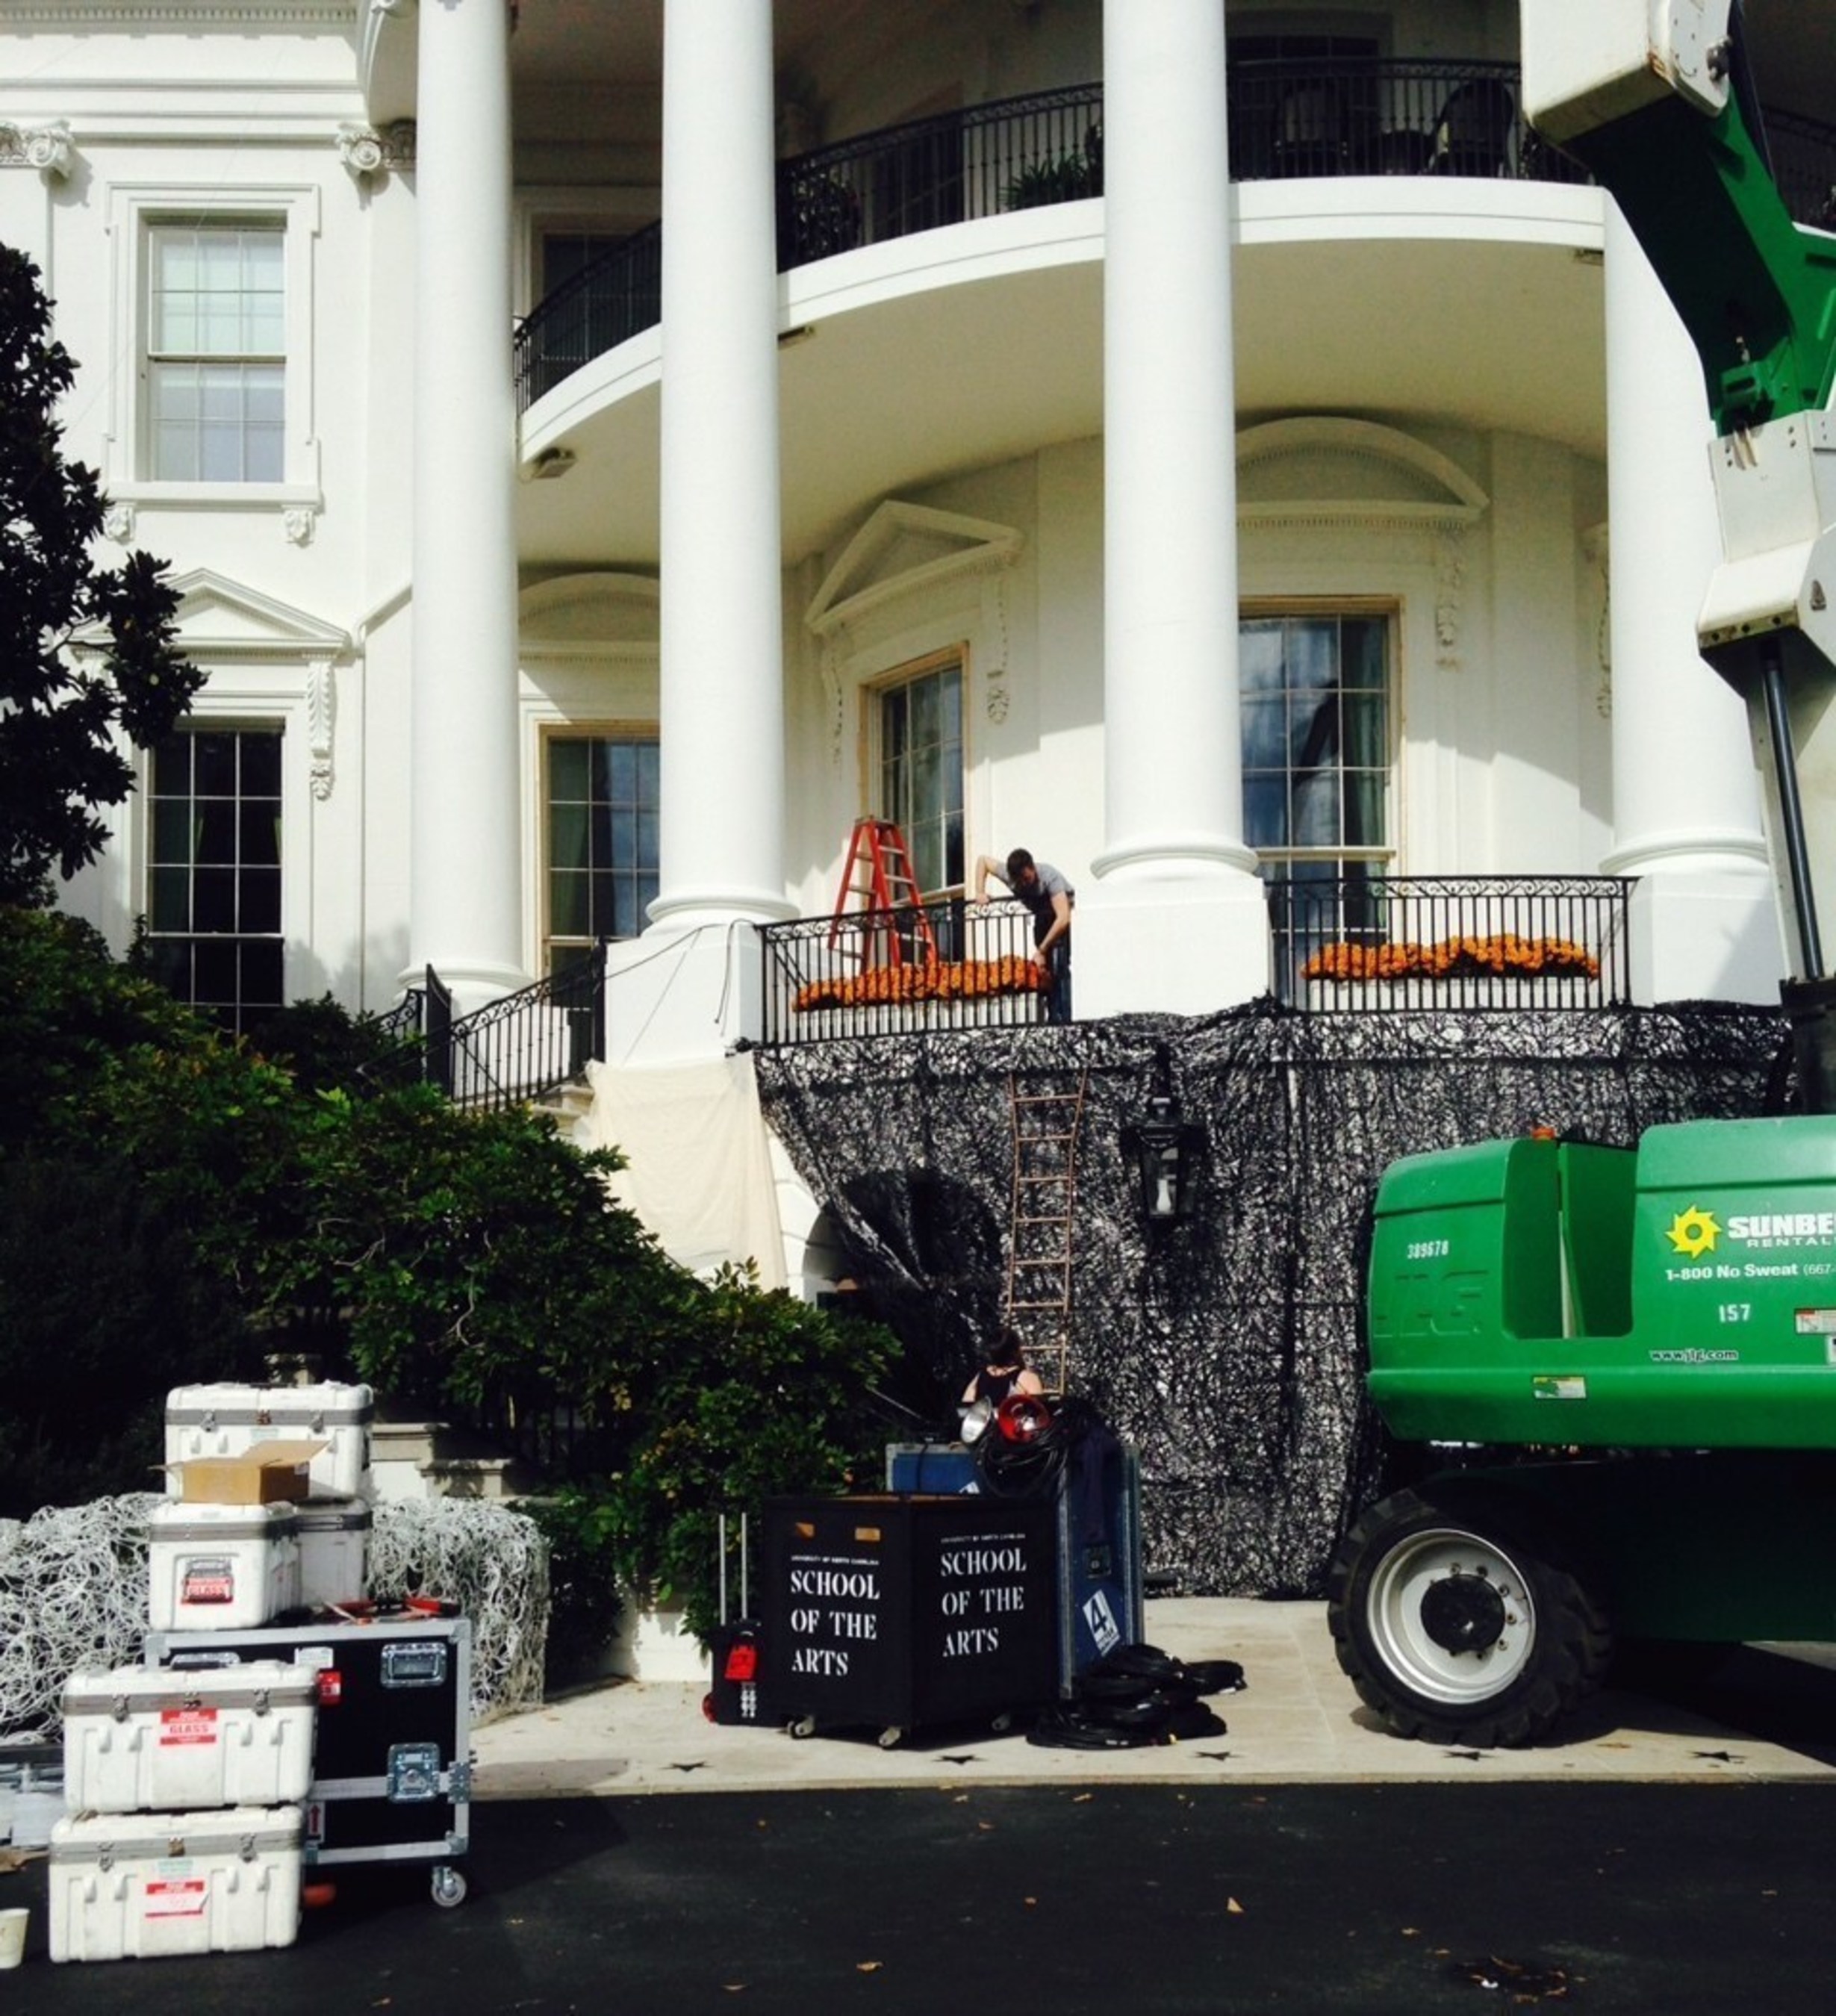 Students, faculty and alumni from the University of North Carolina School of the Arts in Winston-Salem install equipment on the South Portico of the White House in preparation for the annual trick or treat event